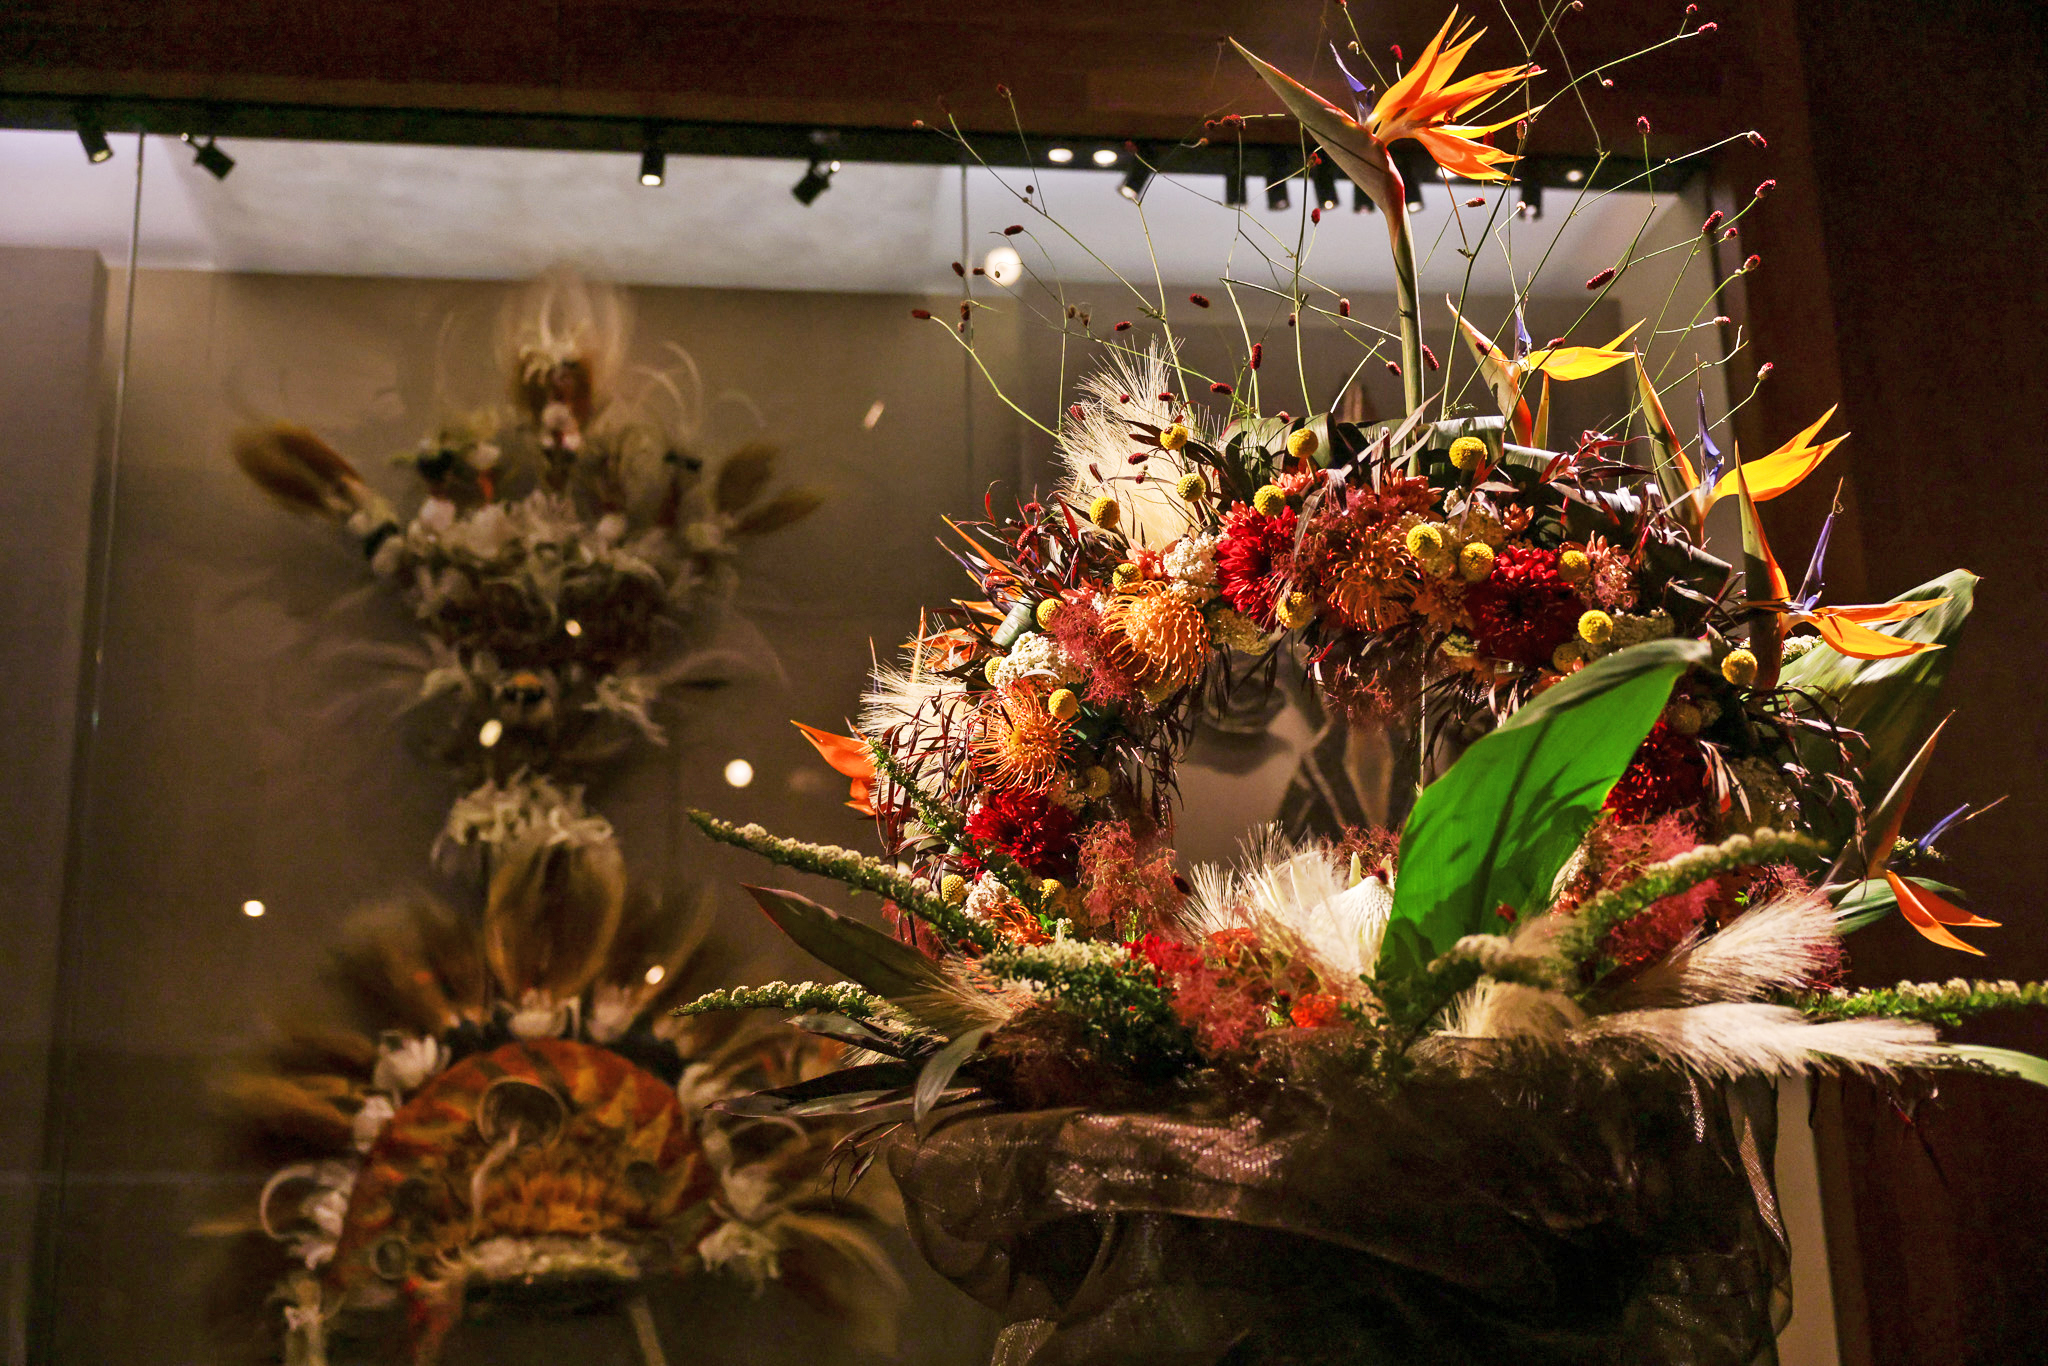 The image features an ornate floral arrangement with vibrant orange, red, and yellow flowers, green leaves, and spiky accents, displayed in a museum-like setting.